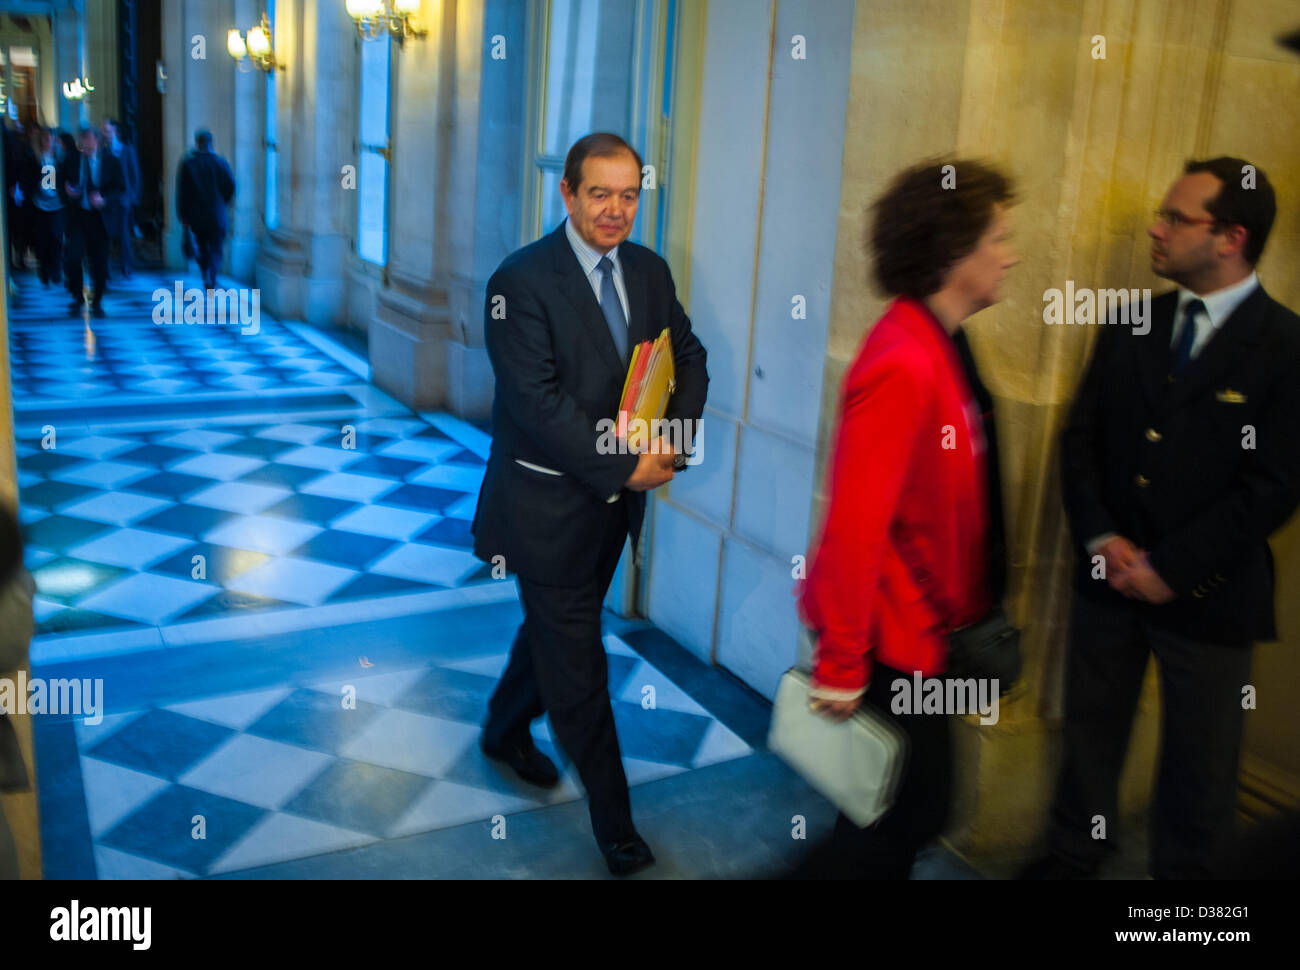 Paris, France. French Politicians, Deputies, Walking in Hall, in the National Assembly Building, french government Stock Photo